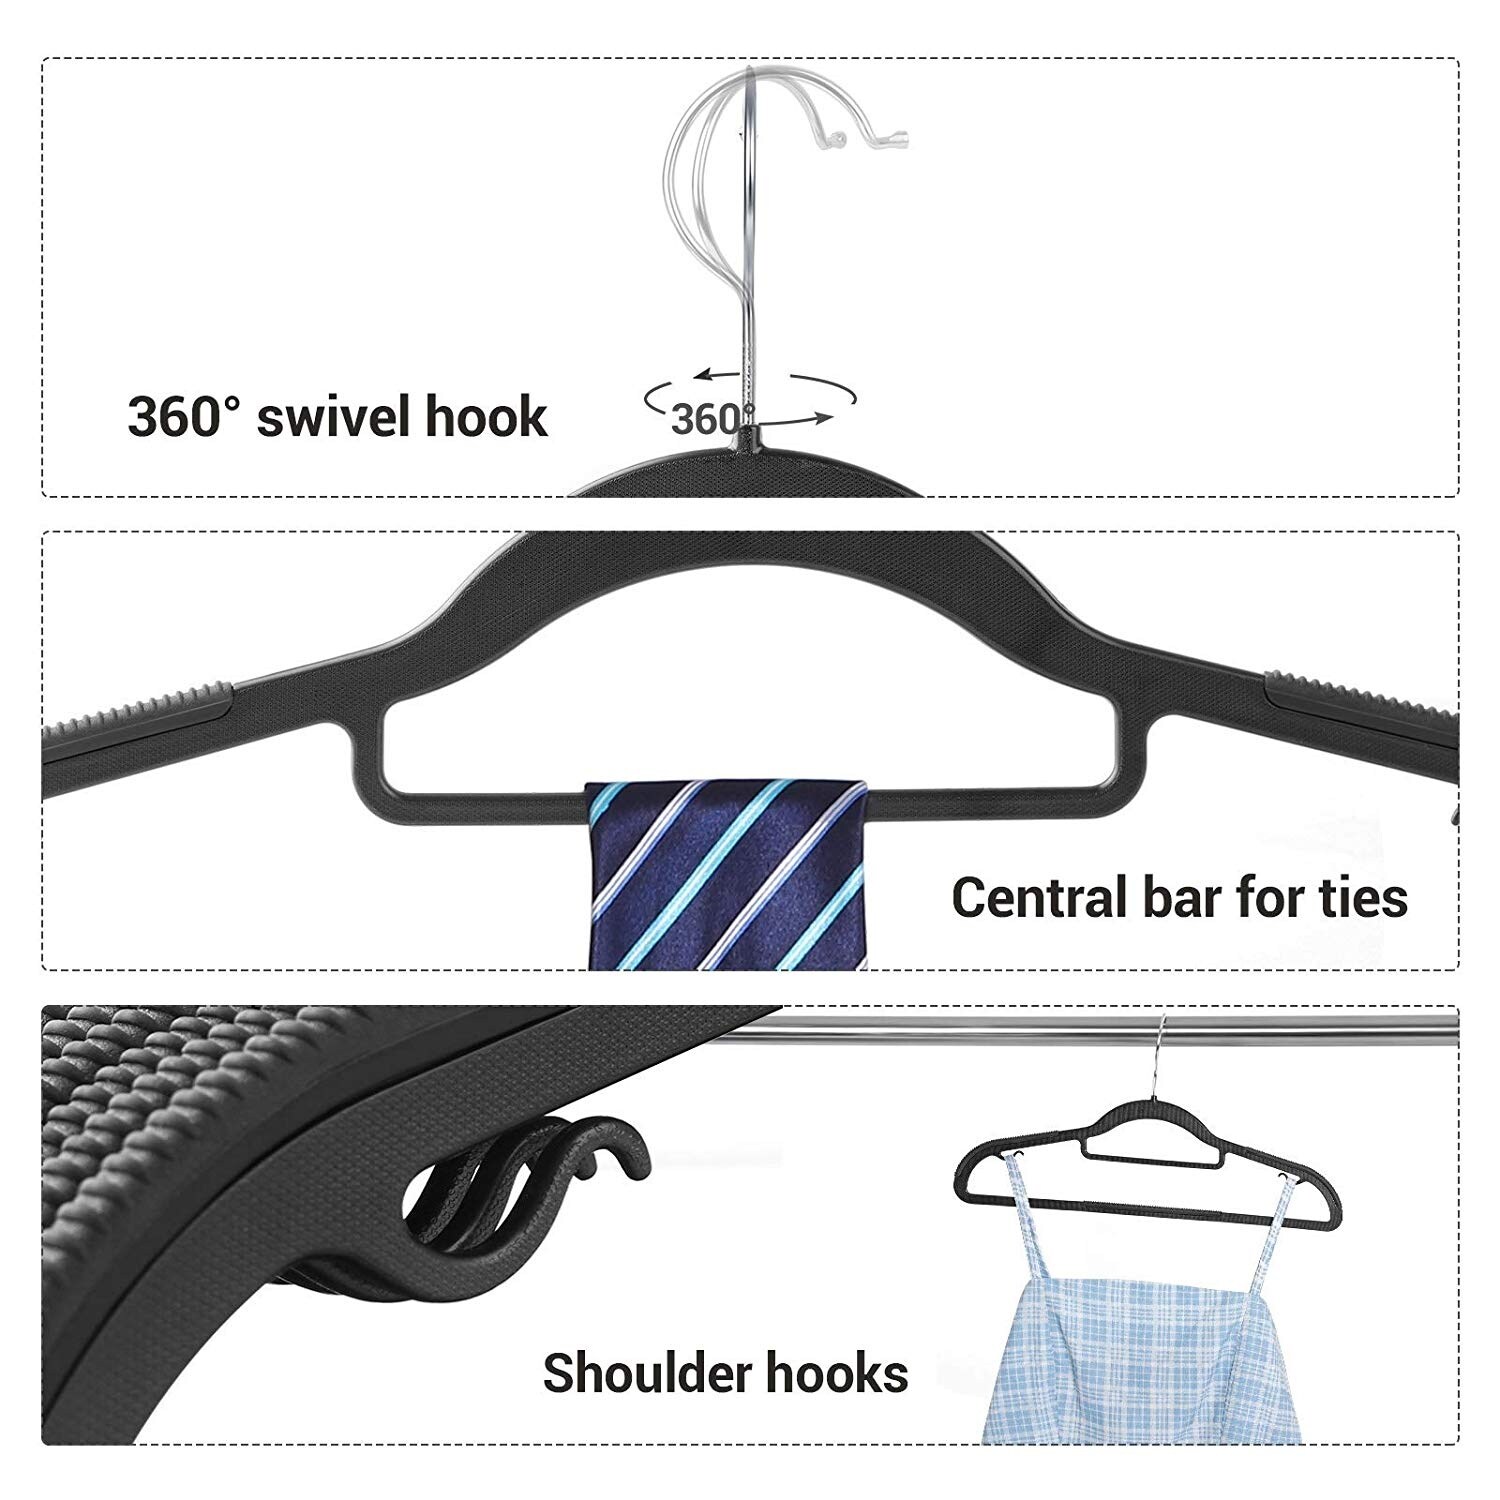 https://ak1.ostkcdn.com/images/products/is/images/direct/b575d94cf2f3284b2545758ae9a8b1707cdab97d/Pack-of-50-Coat-Hangers%2C-Heavy-Duty-Plastic-Hangers-with-Non-Slip-Design%2C-Space-Saving-Clothes-Hangers%2C-0.2-Inch-Thickness.jpg